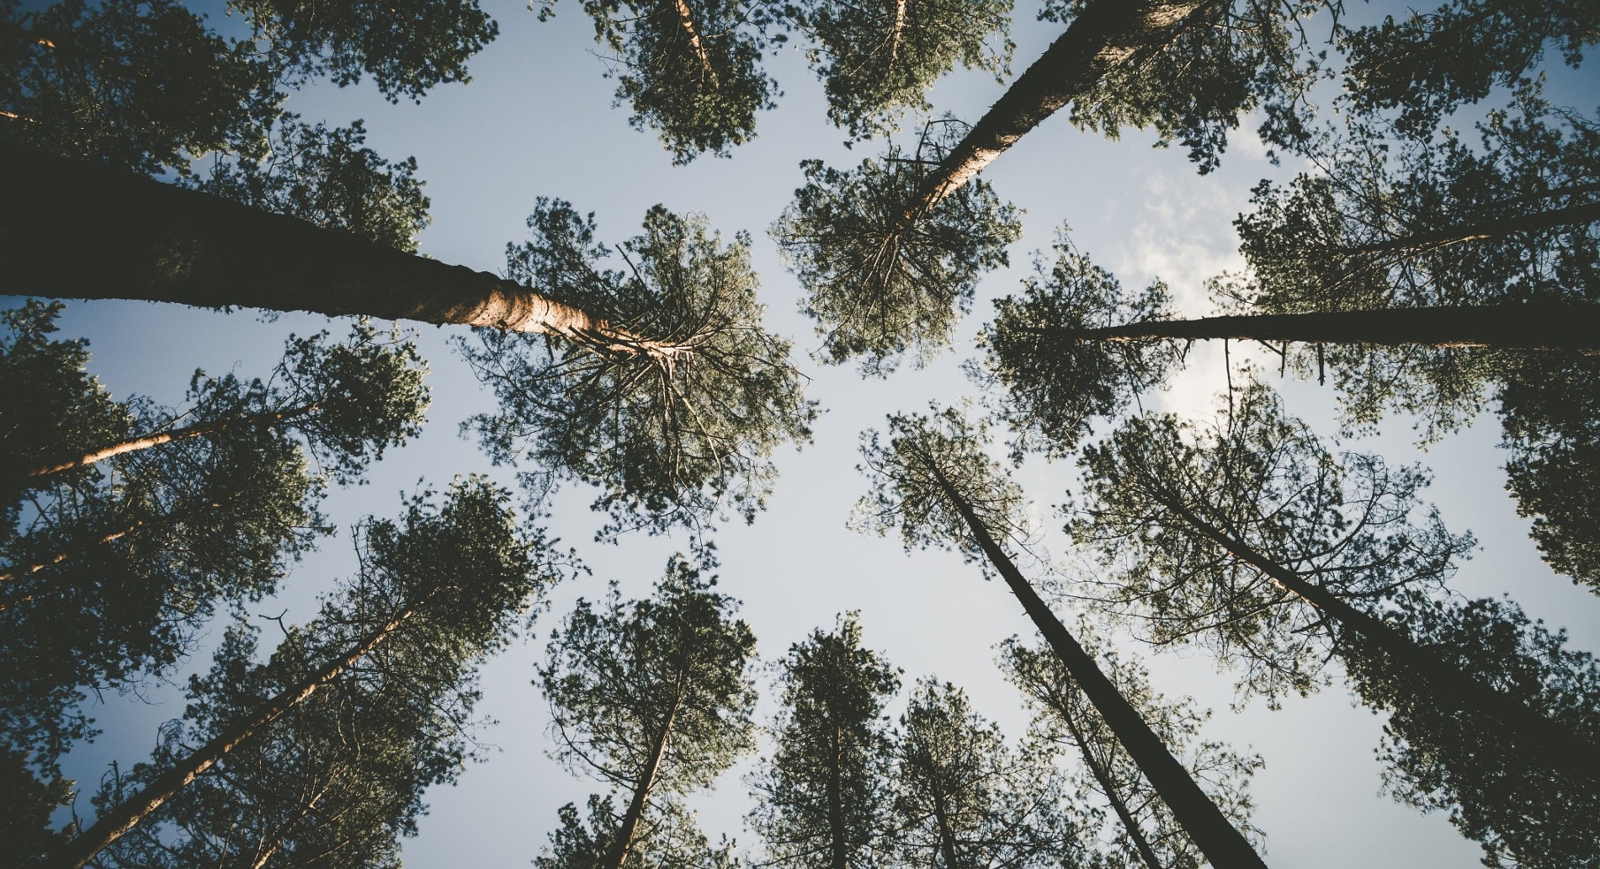 Photo from the perspective of a forest floor, looking up at blue sky framed by tall trees.